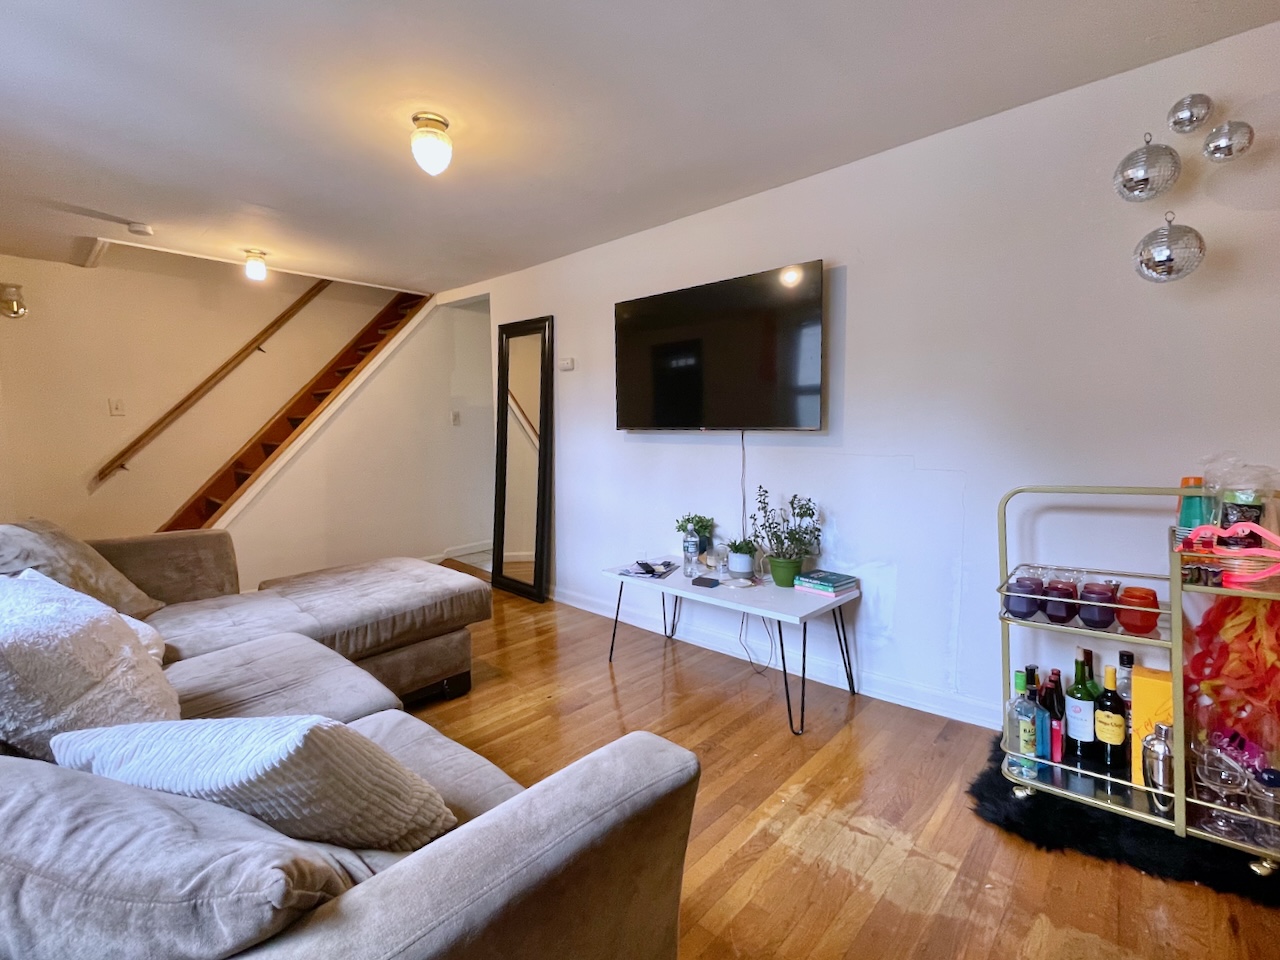 This spacious apartment features 4 beds/2 baths, washer/dryer in unit, dishwasher, and driveway parking available for an additional fee. Located in a great Midtown Hoboken location, this apartment allows for easy transportation for commuters who can also enjoy close proximity to great restaurants, shopping, and parks.  Available July 1st! Ask to see the virtual tour!